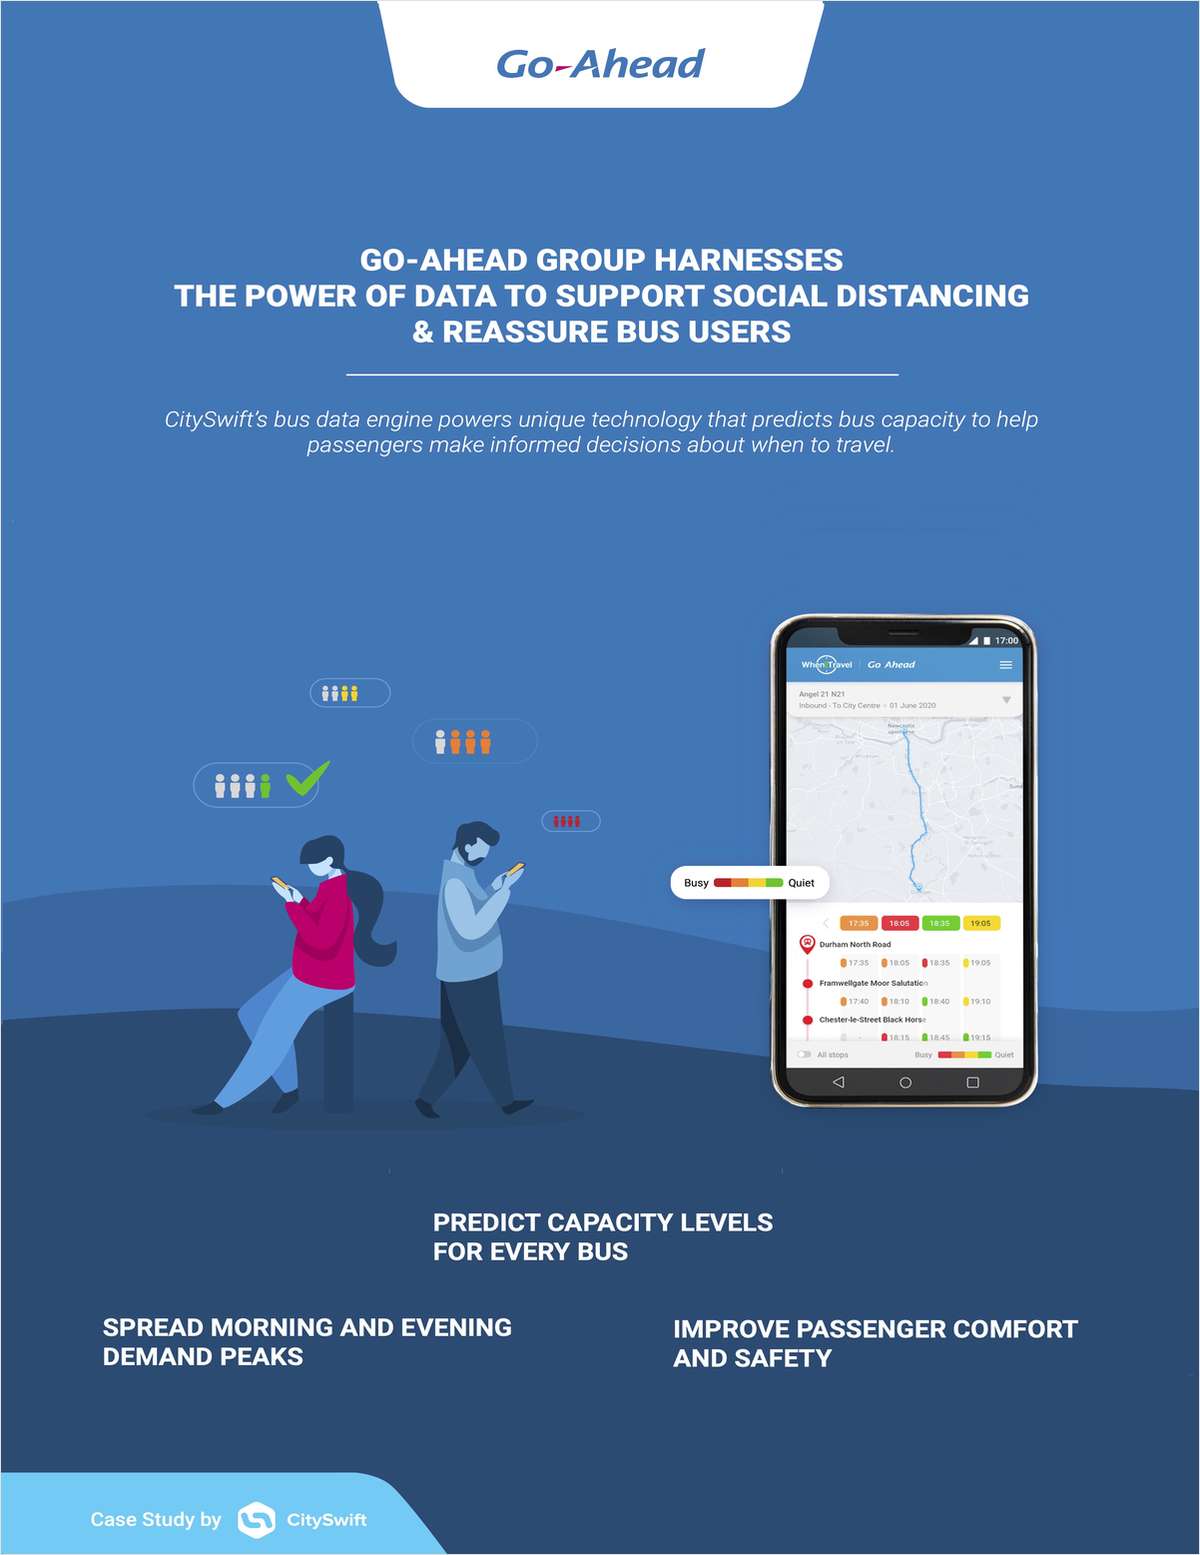 Go-Ahead Group harnesses the power of data to support social distancing and reassure bus users